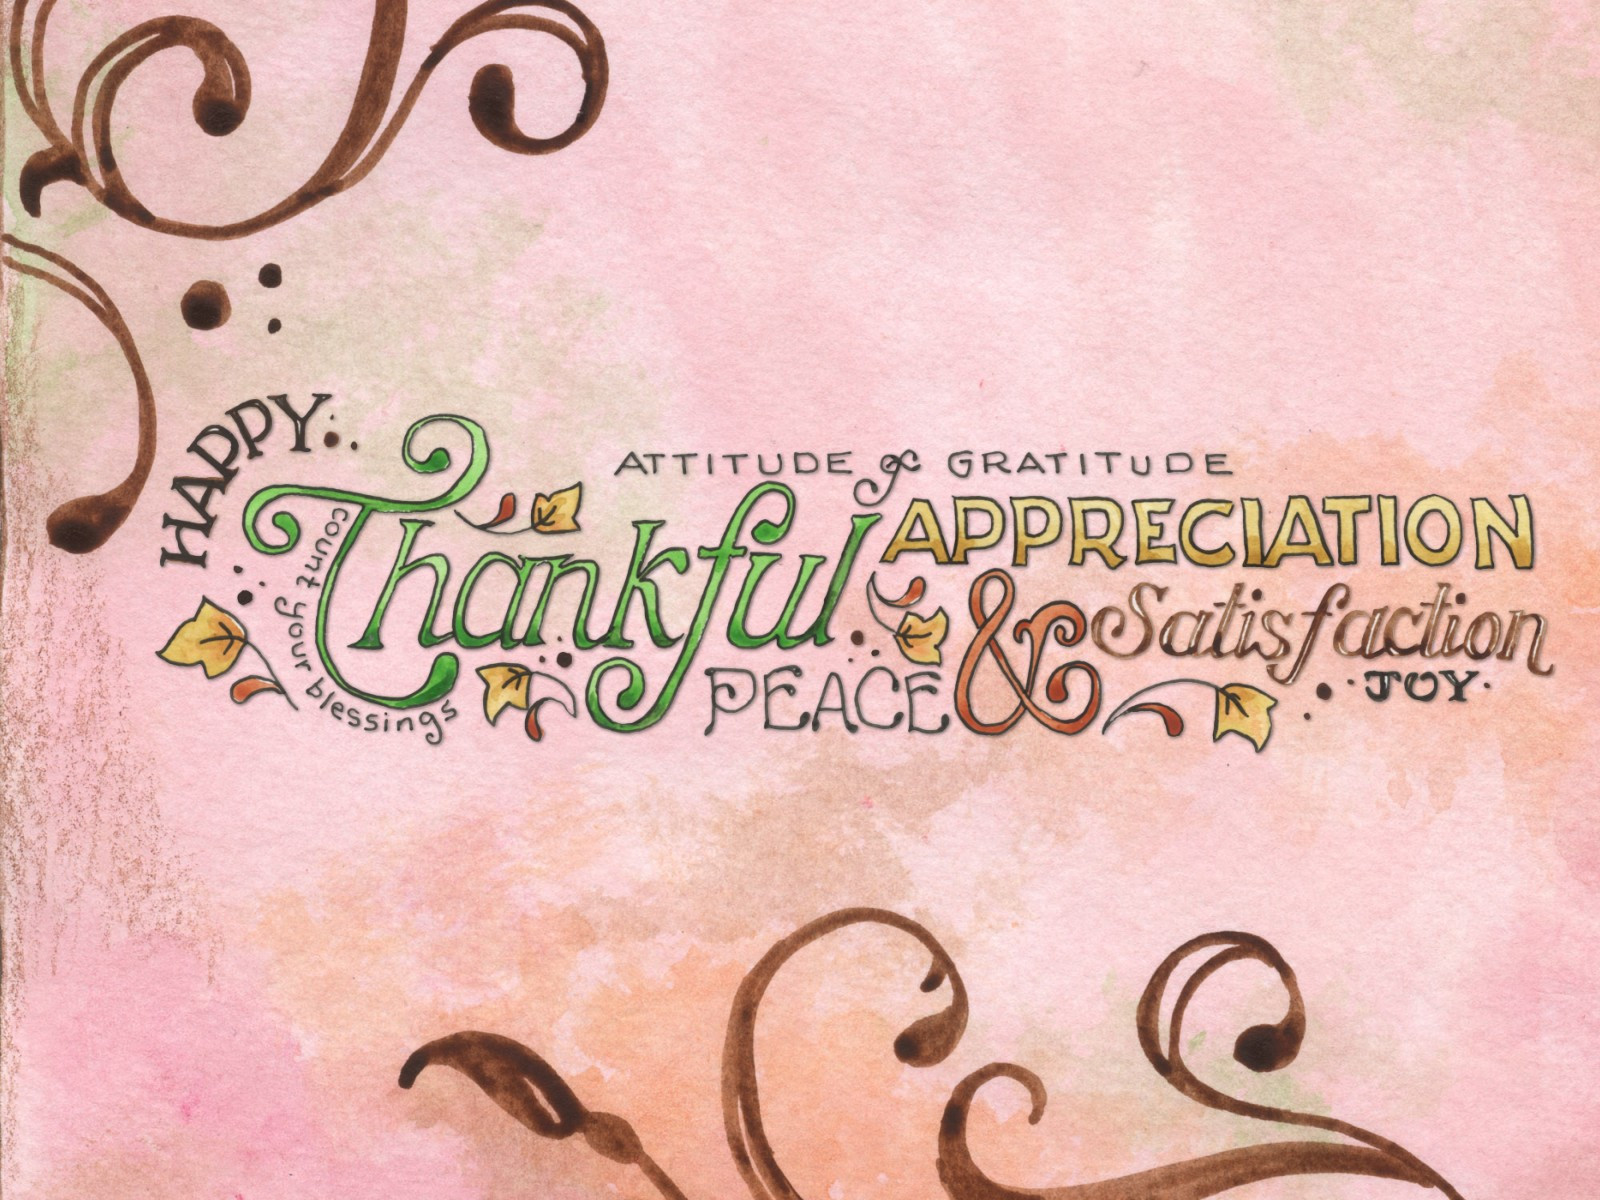 Thanksgiving Quotes Wallpaper
 Thanksgiving Wallpapers